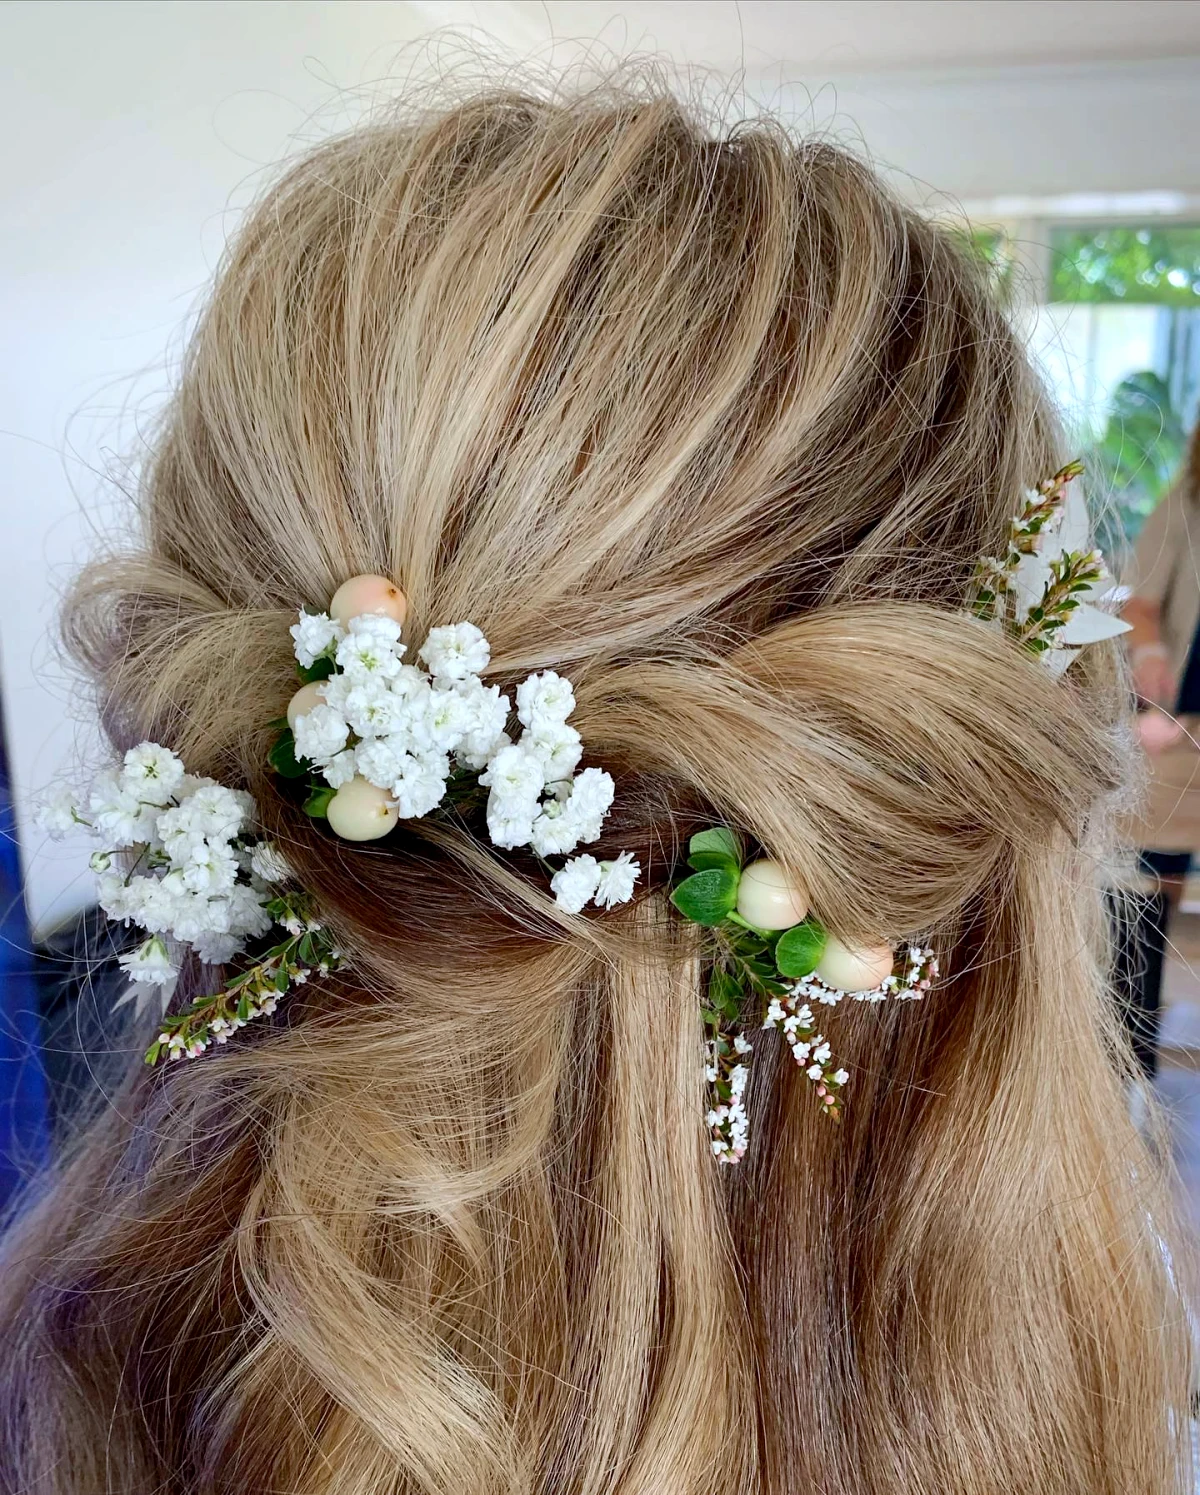 coiffure mariage cheveux blond long fleurs blanches